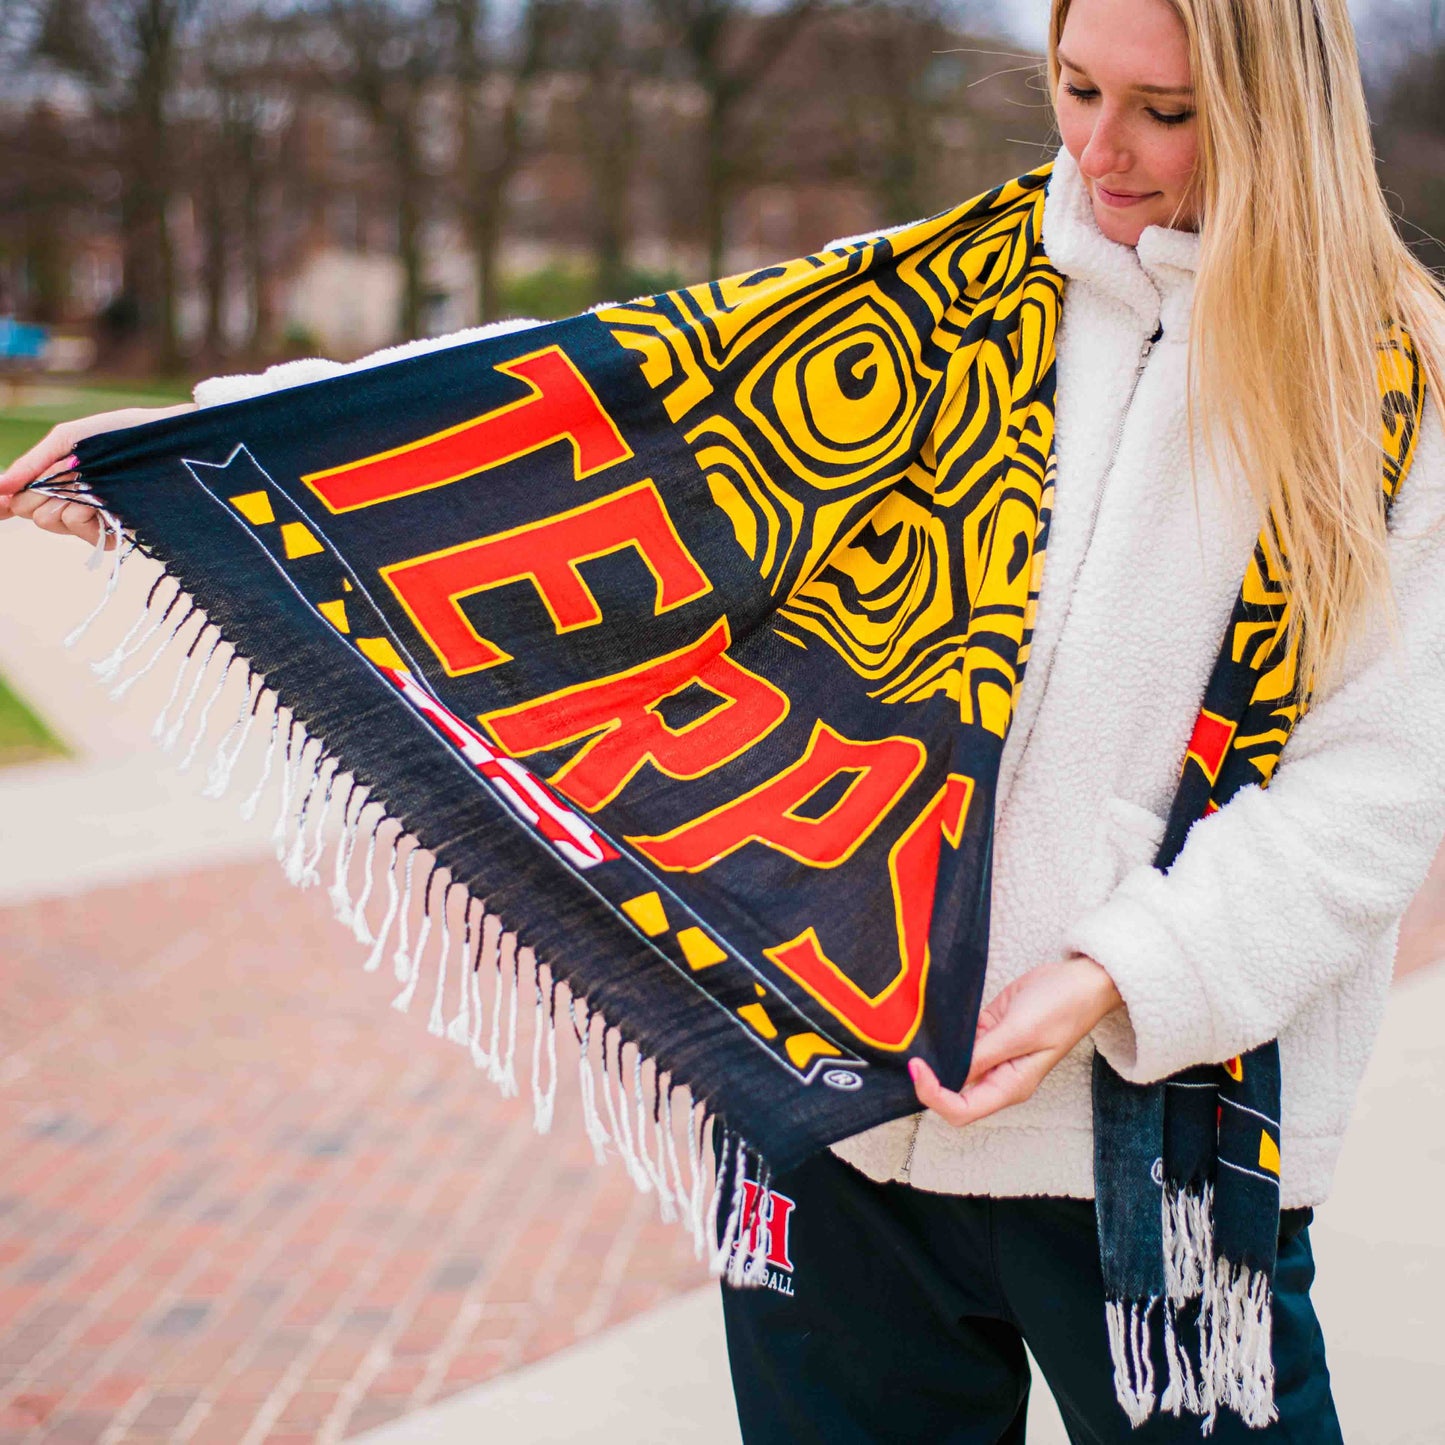 UMD Terps & Turtle Shell (Black & Gold) / Scarf - Route One Apparel